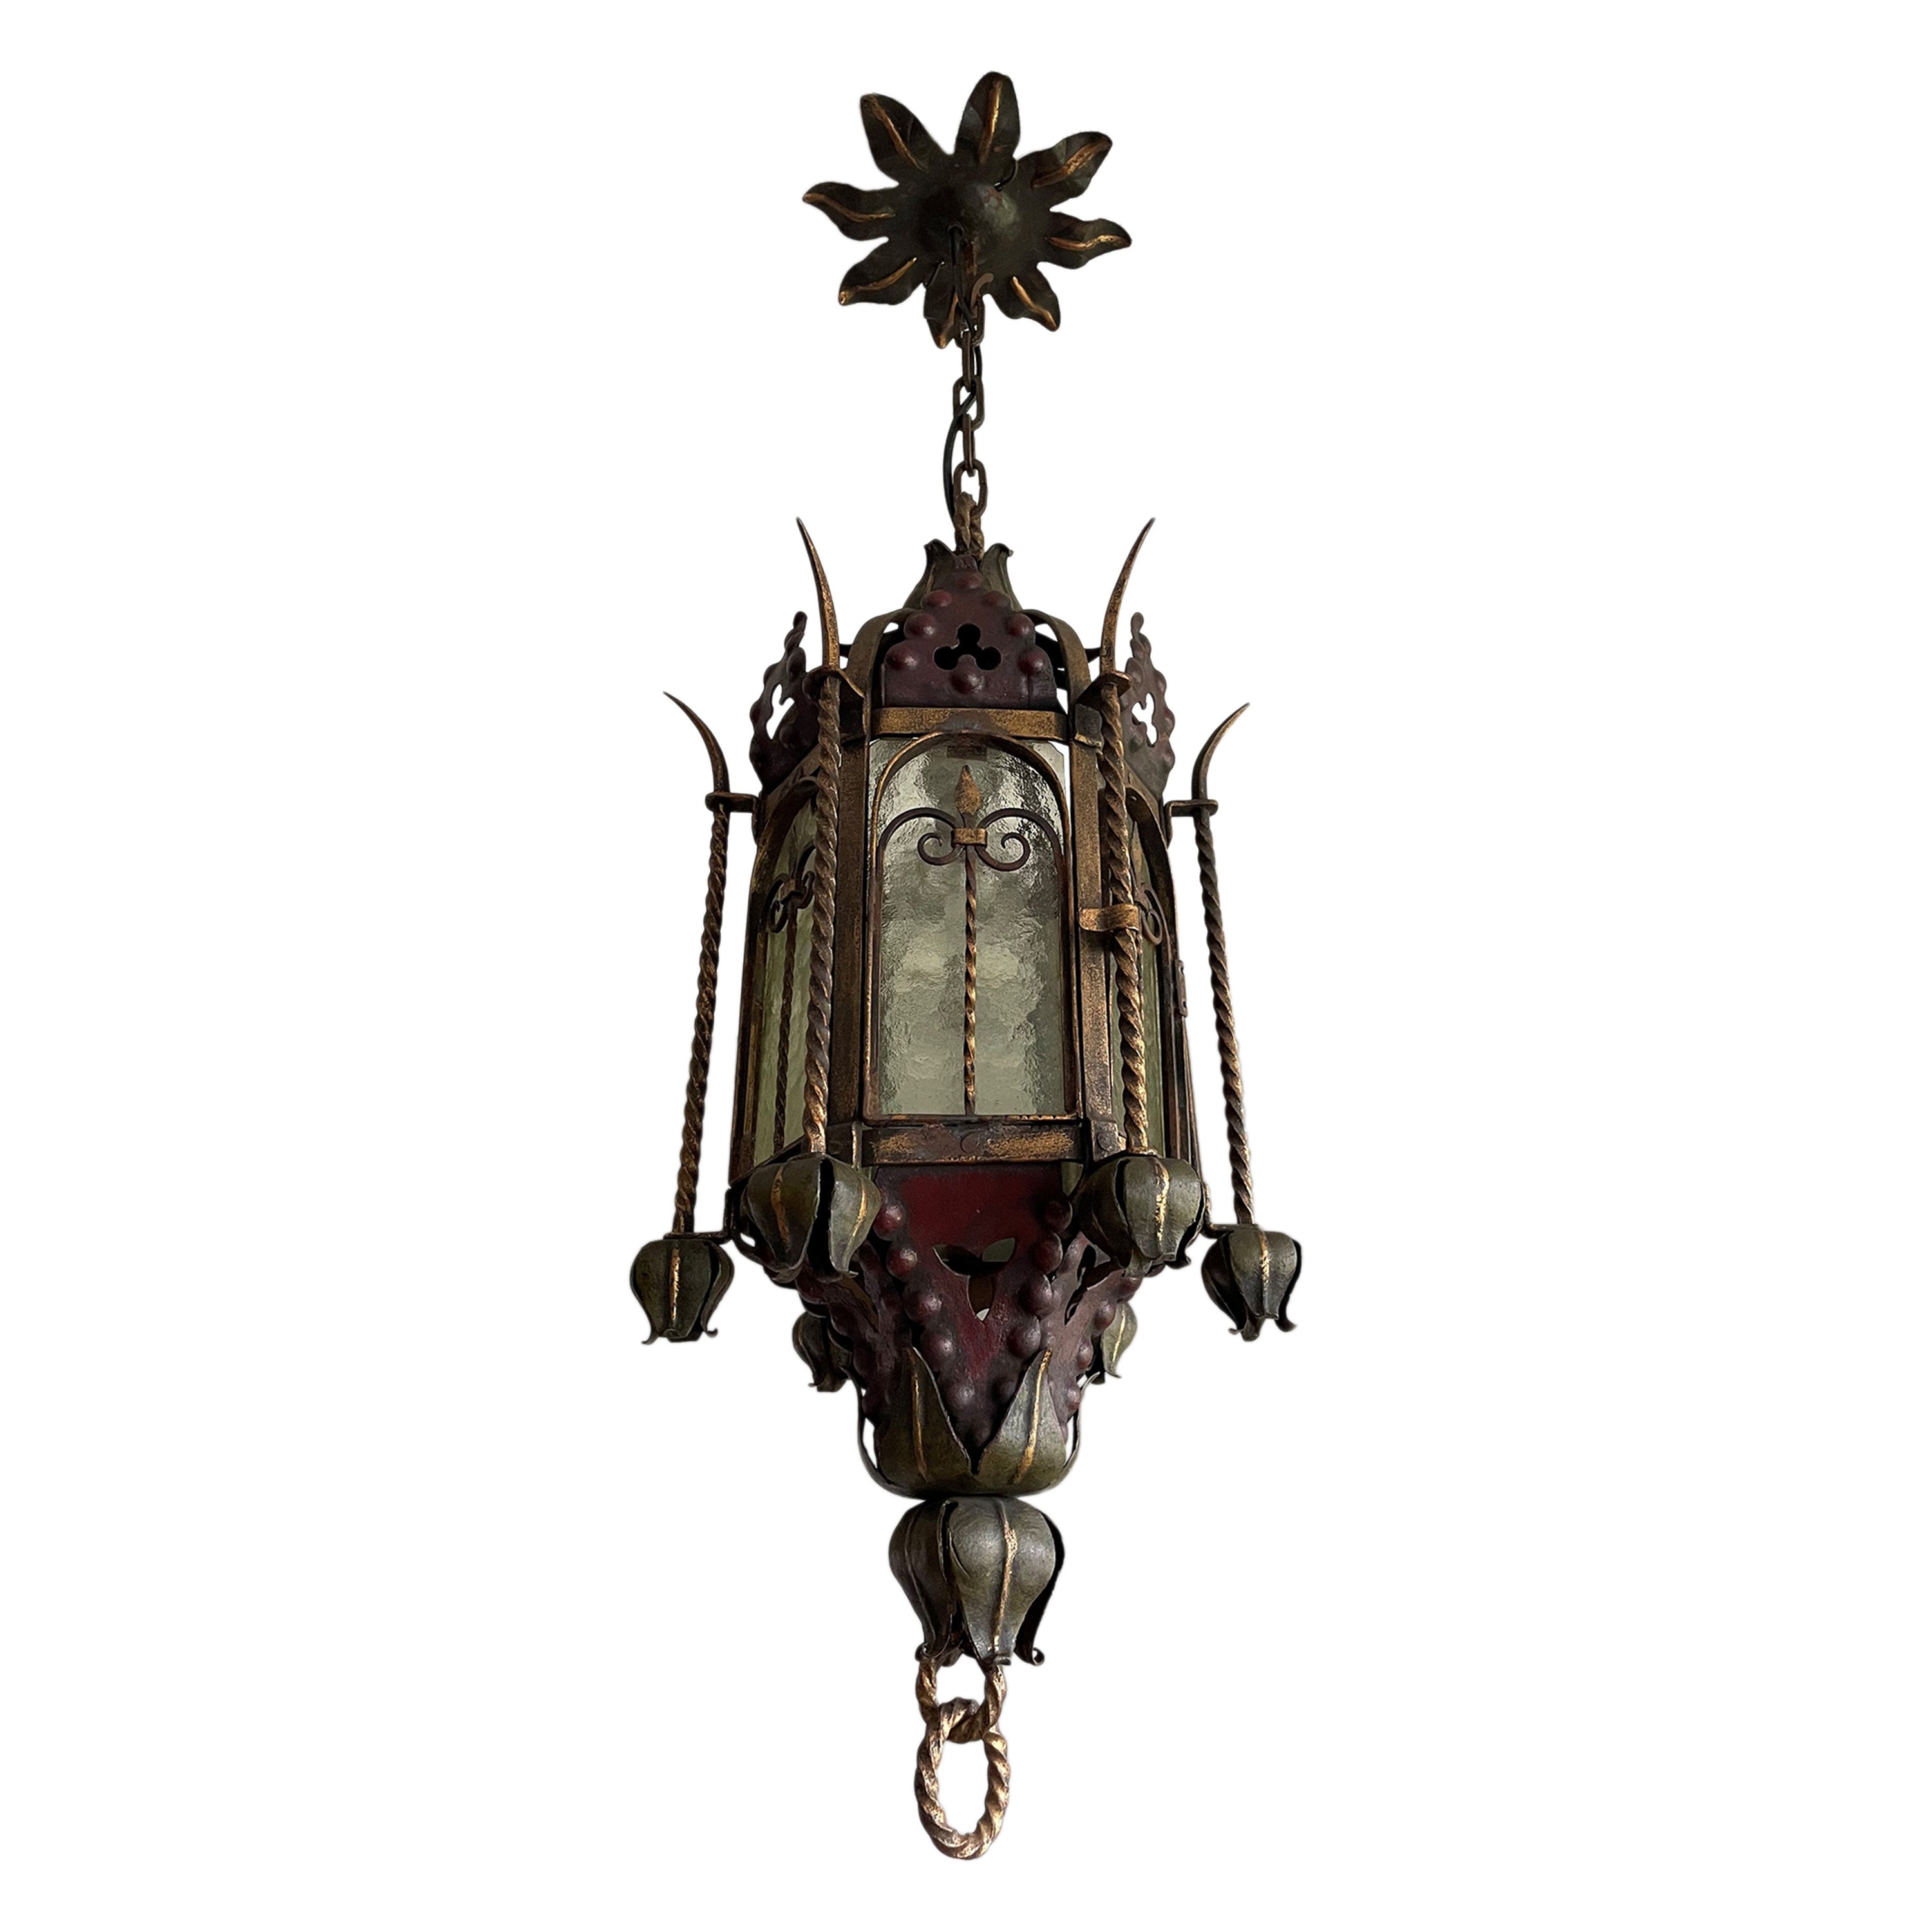 Antique & Good Size Gothic Revival Wrought Iron & Cathedral Glass Lantern 1910s